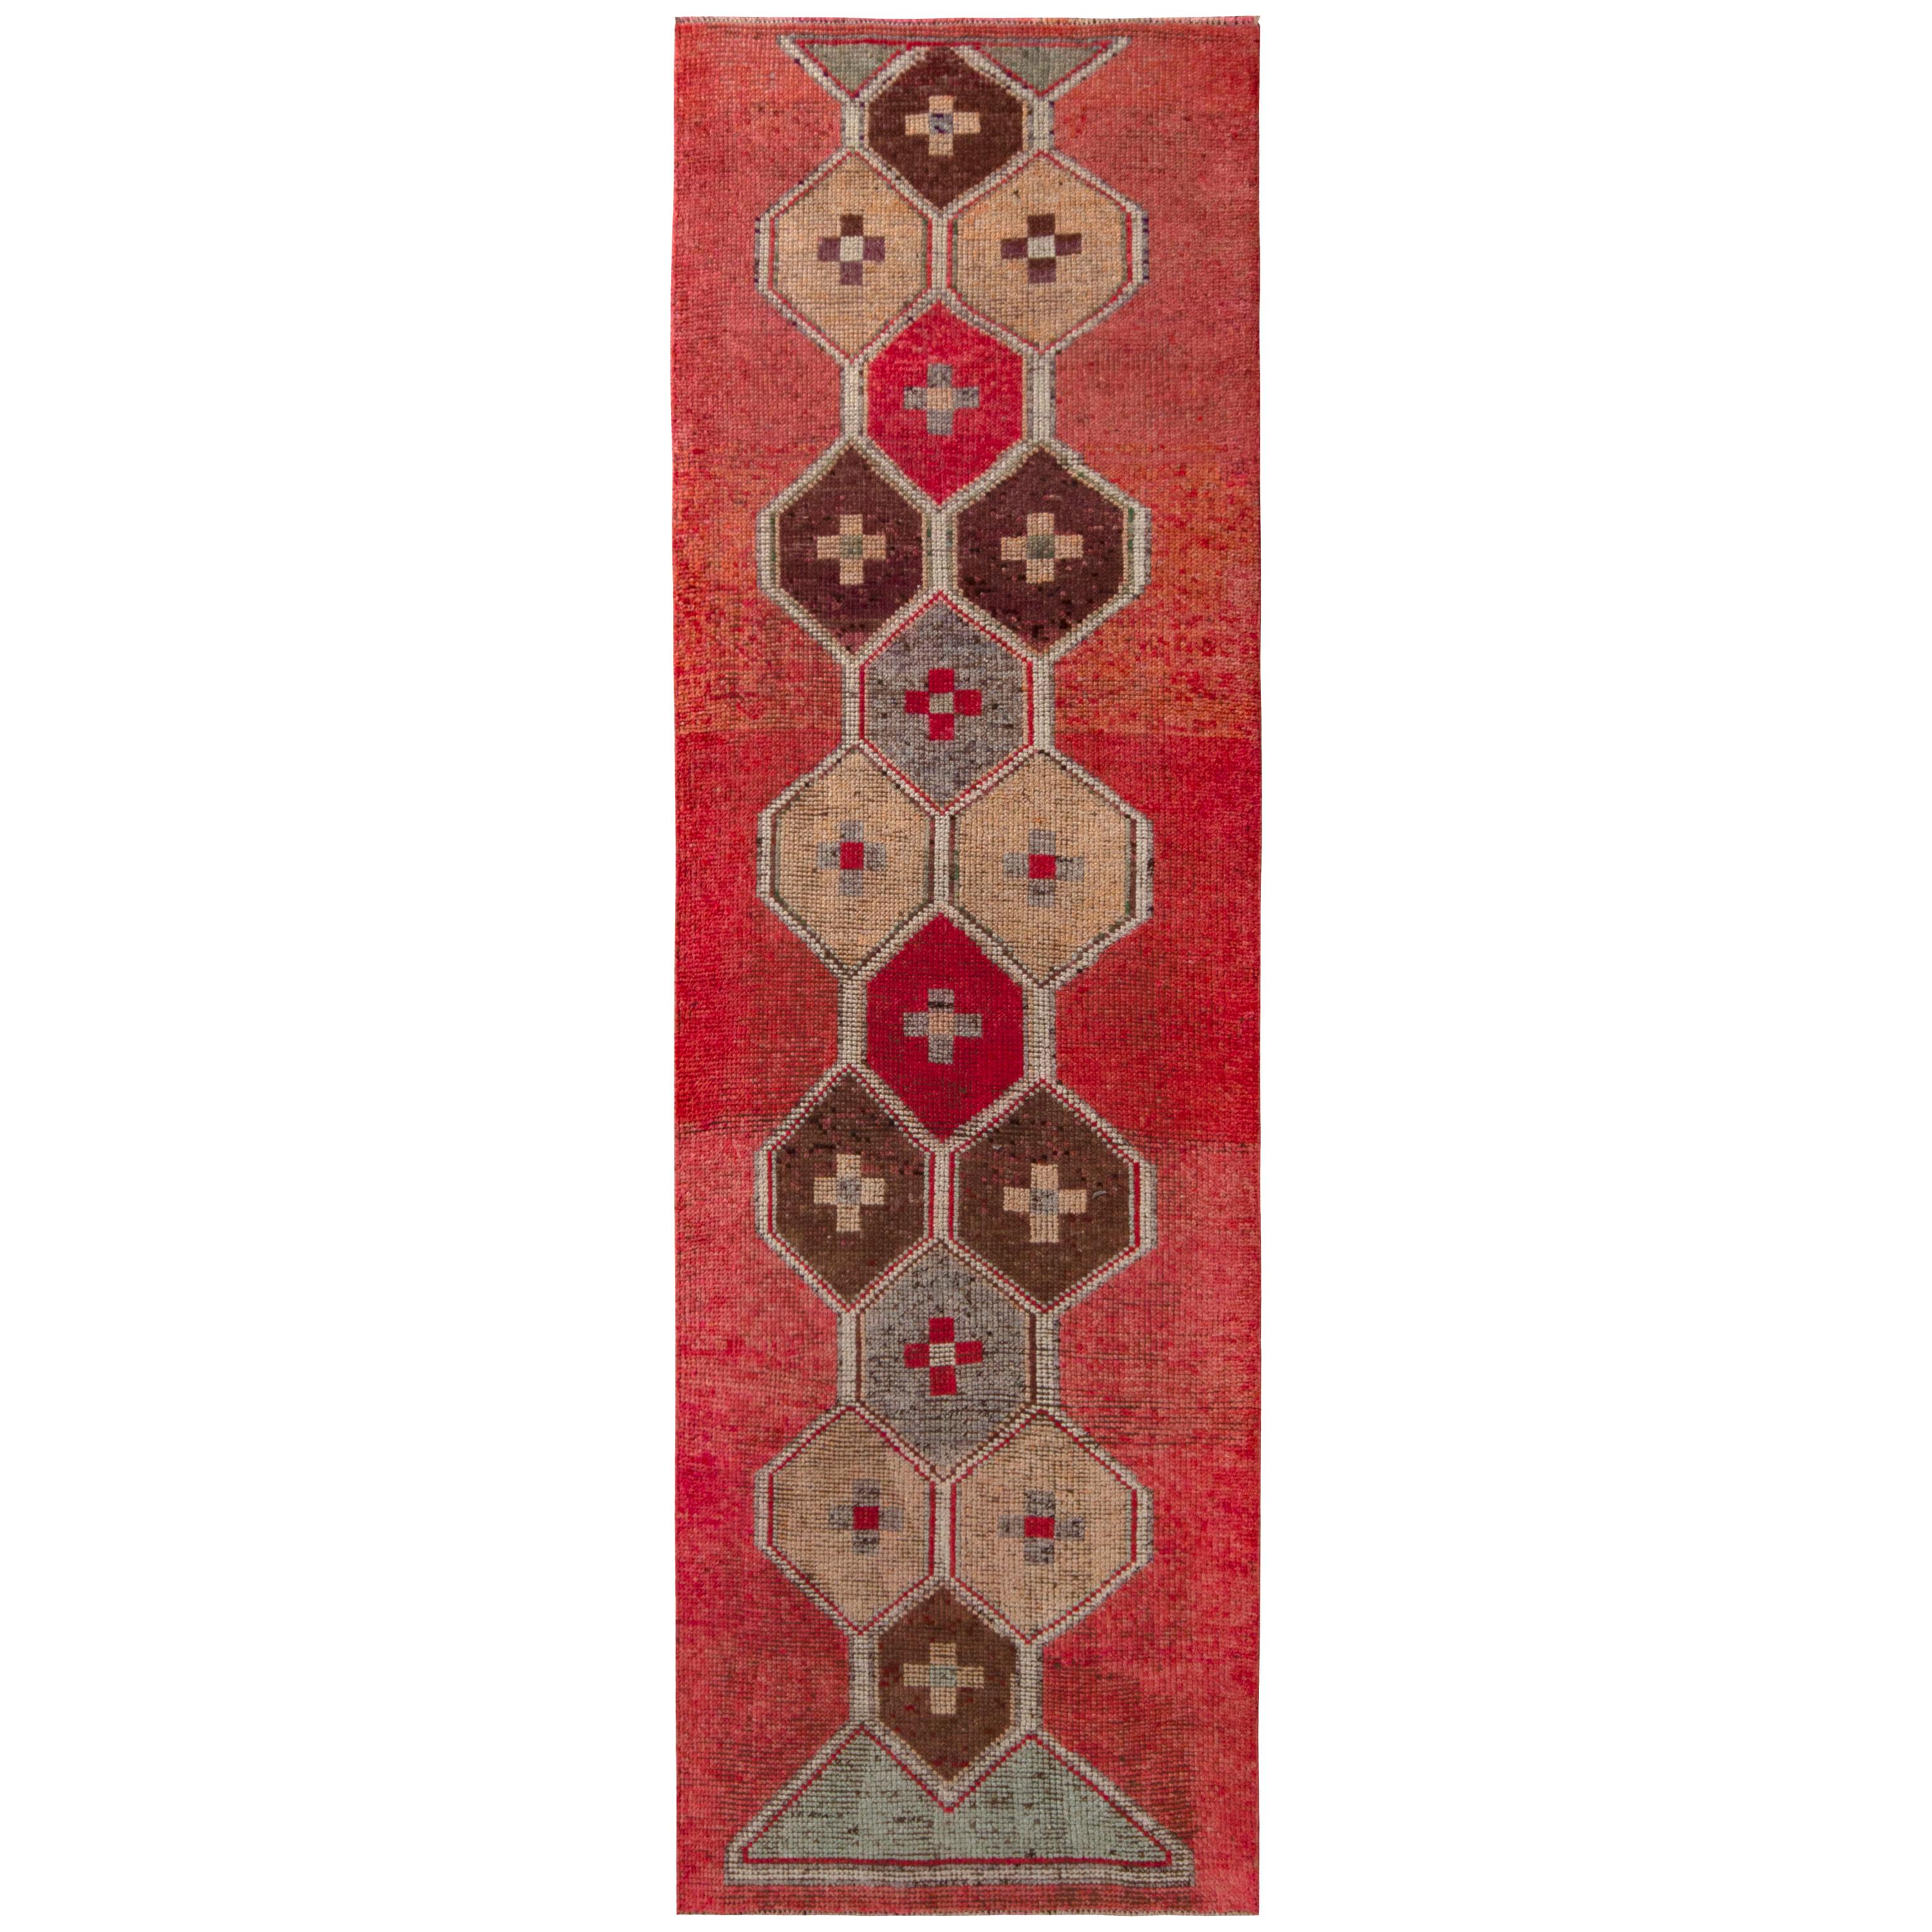 Vintage 1950s Red Runner Beige-Brown Blue Embroidery Pattern by Rug & Kilim For Sale